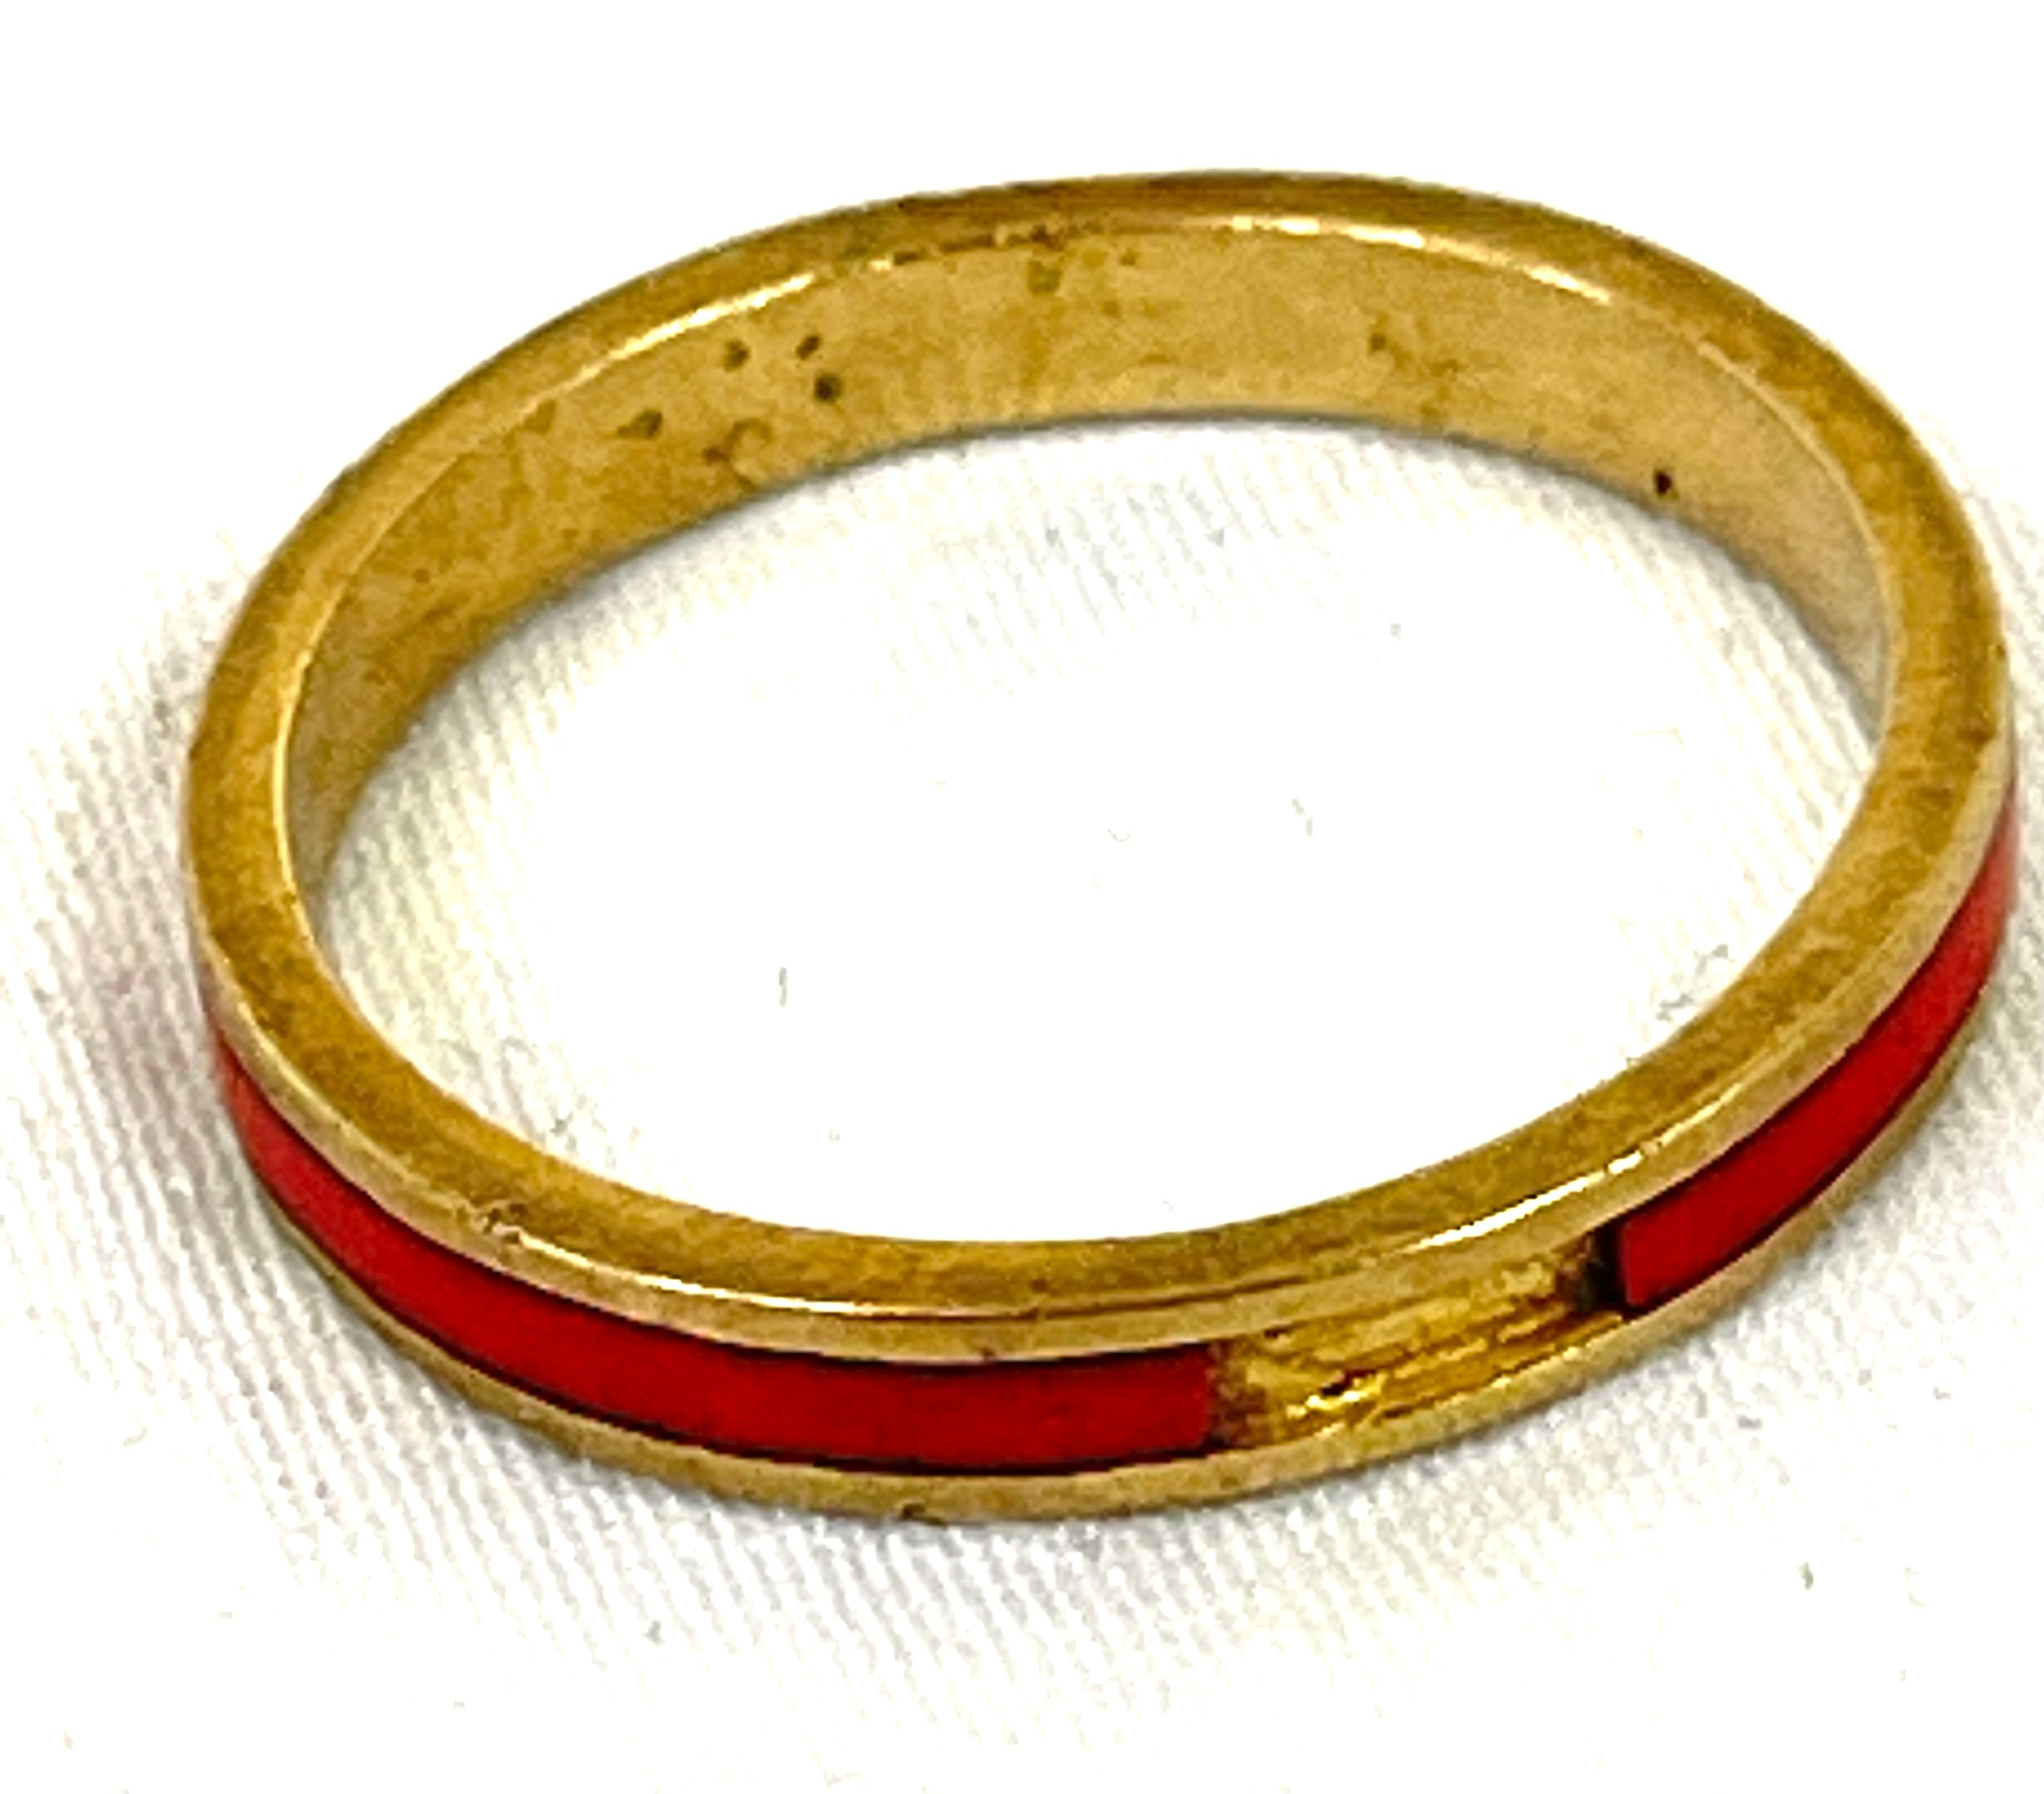 18ct gold hallmarked enamel band, damage to enamel as seen in image, approximate weight: 2.8g - Image 3 of 4